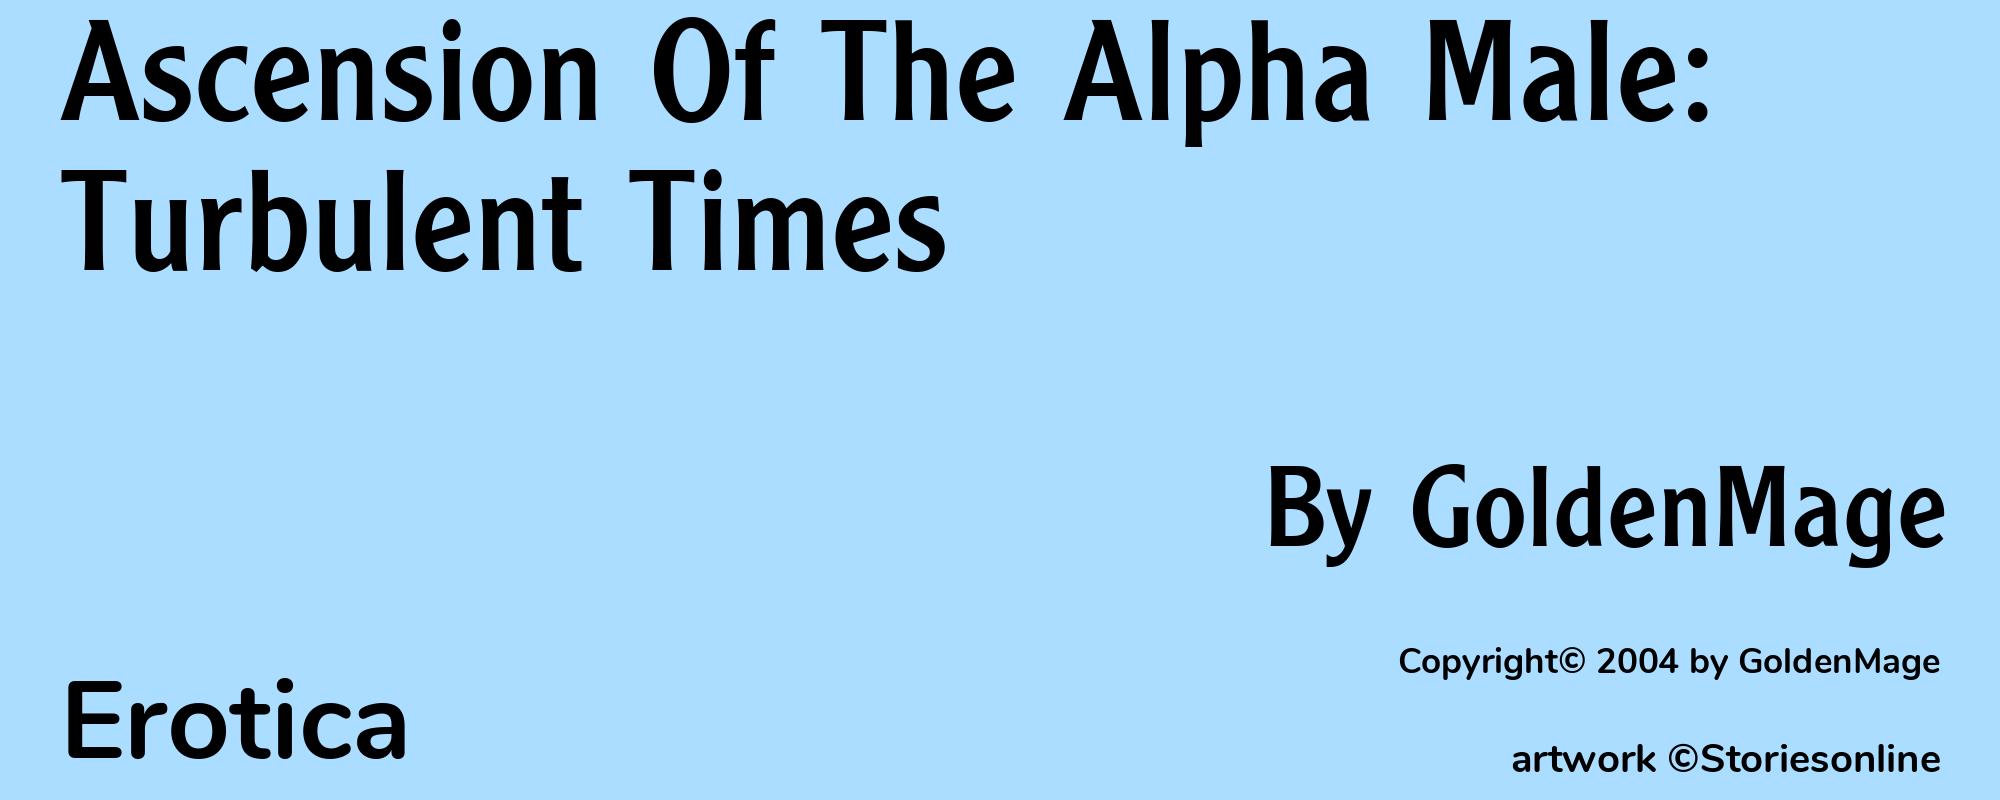 Ascension Of The Alpha Male: Turbulent Times - Cover